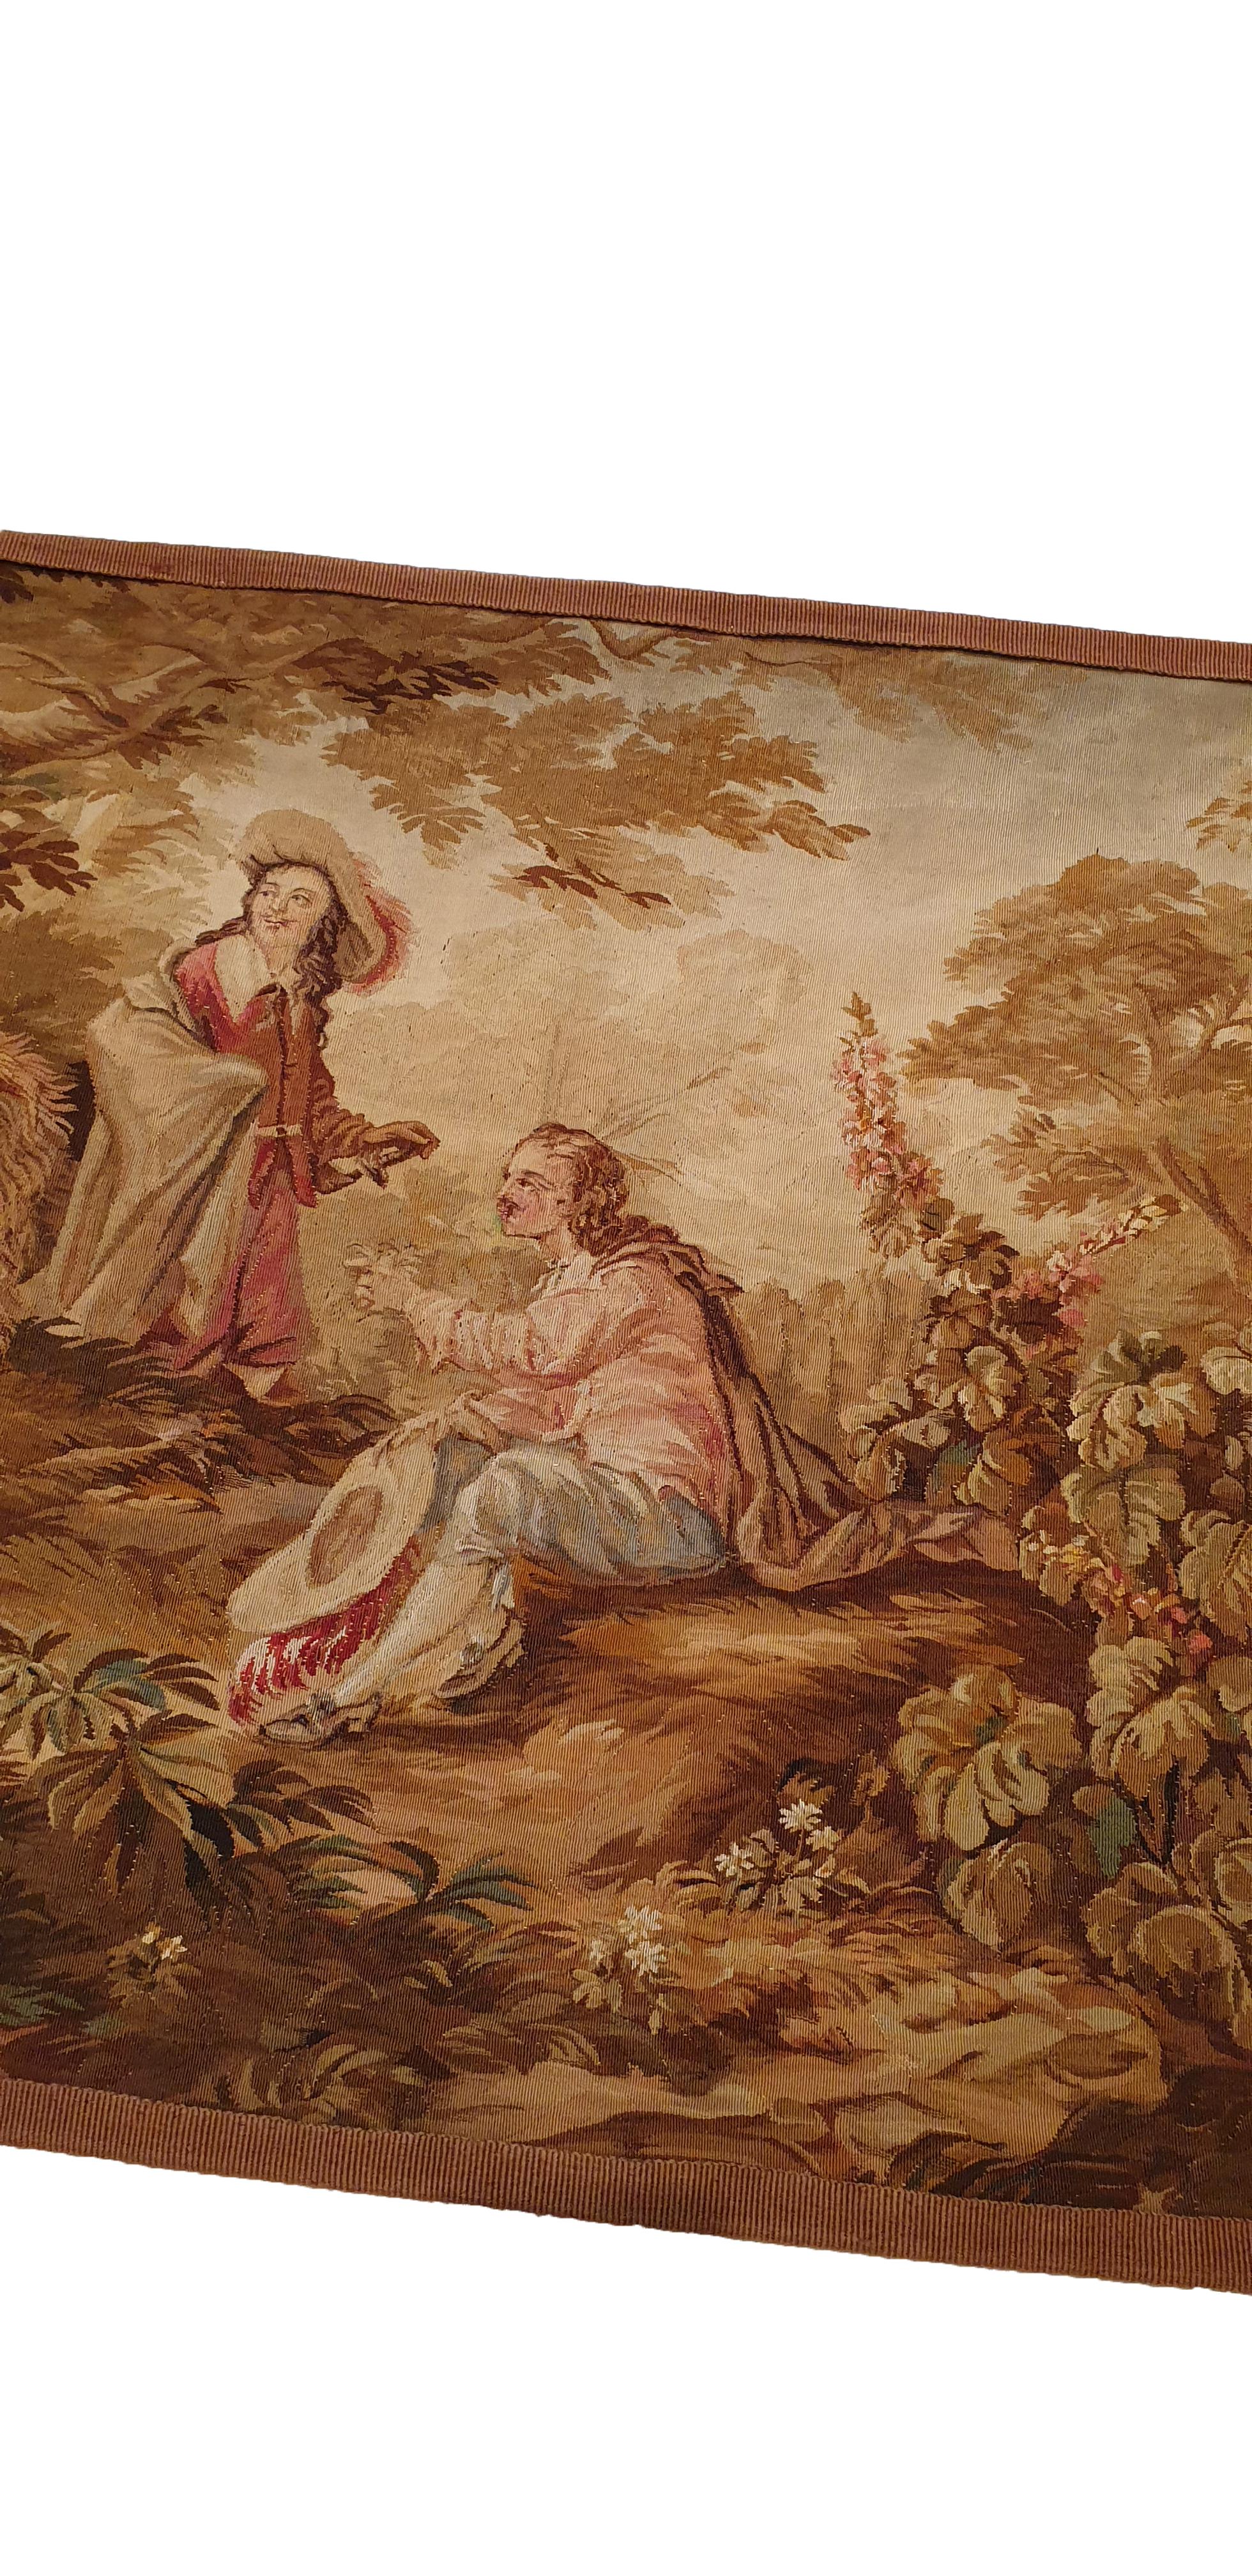  Tapestry Brussels, 19th Century - N° 704 For Sale 3